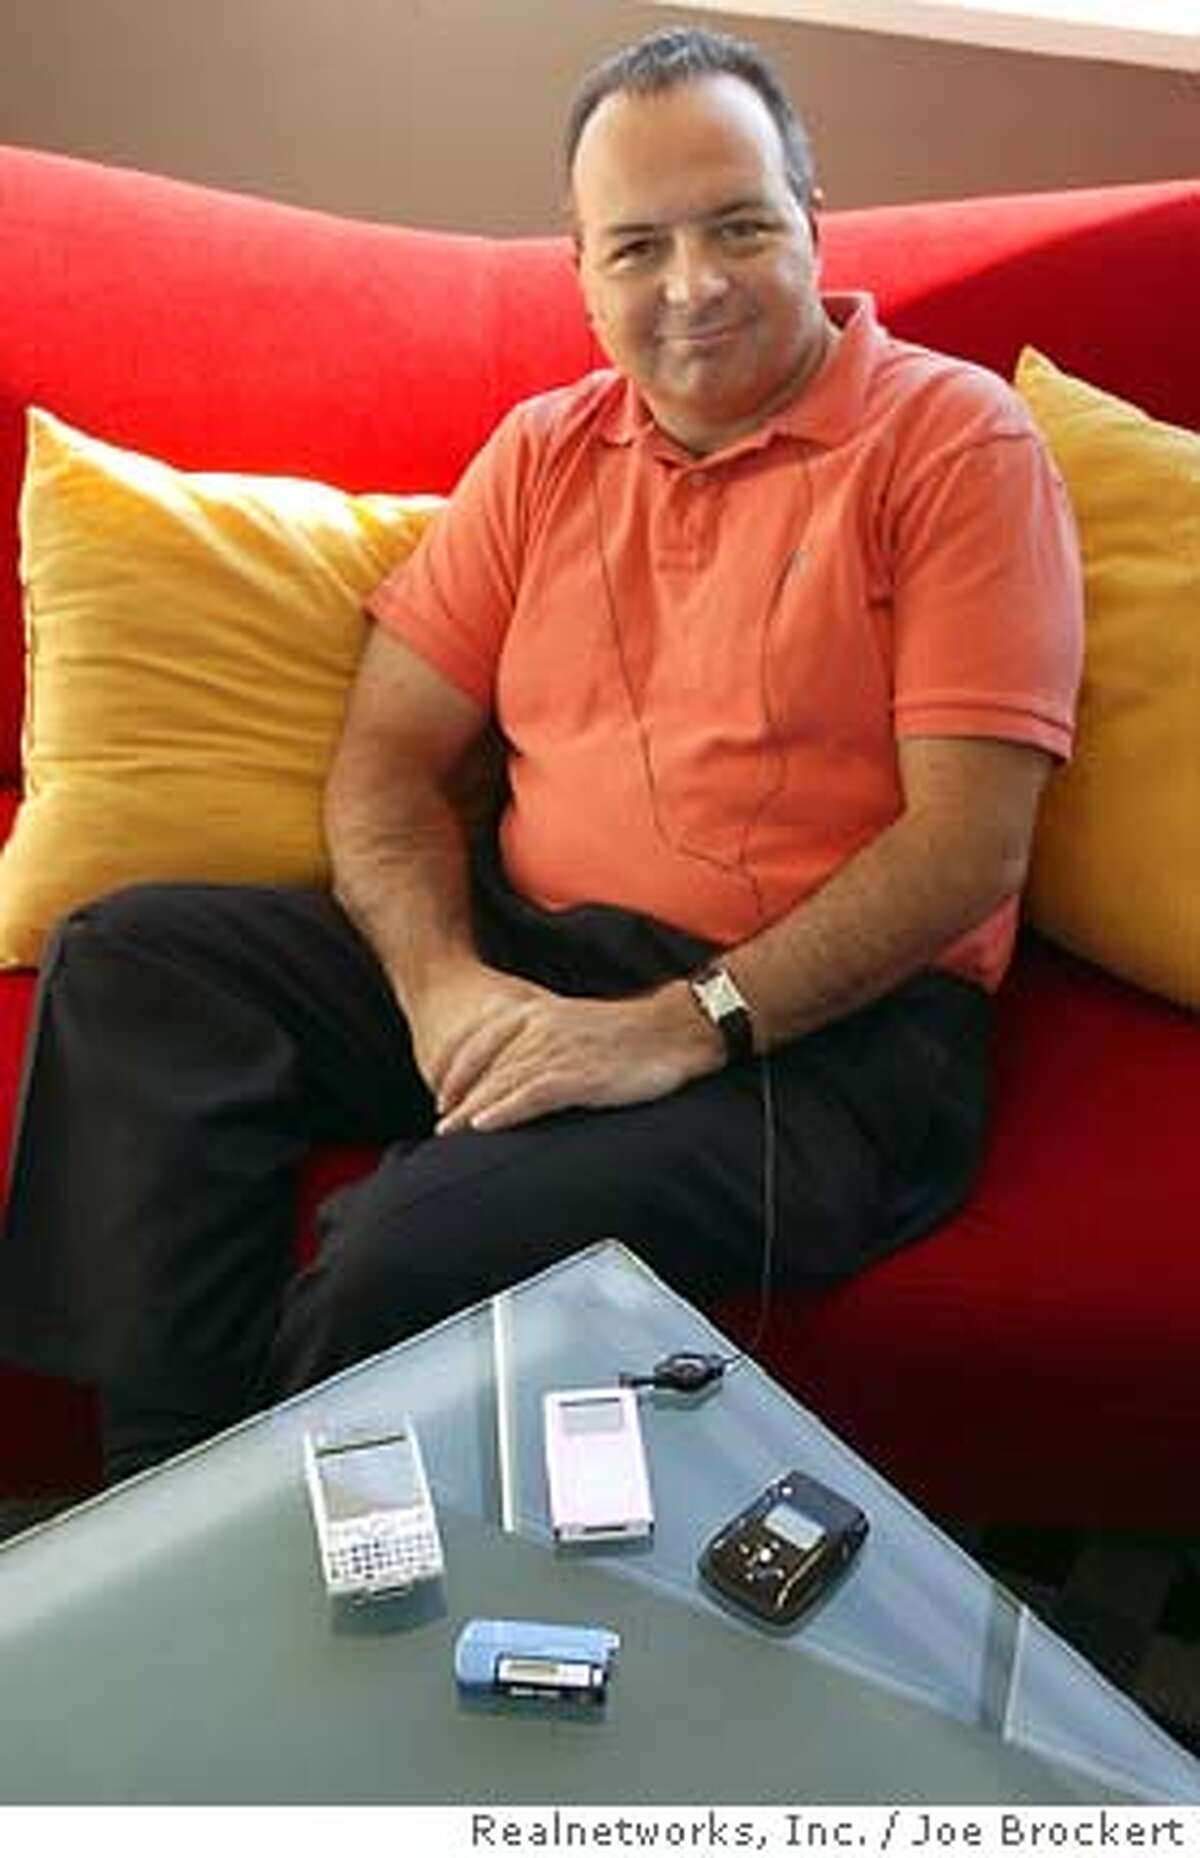 RealNetworks Inc. chief executive Rob Glaser relaxes Friday, July 23, 2004, listening to one of the company's new products at their headquarters in Seattle. RealNetworks Inc. says it has created technology that allows songs purchased through its online music services to be played on Apple Computer Inc.'s iPod player, just a few months after complaining that Apple was rebuffing attempts to form an alliance. In an interview Friday, Glaser said he did not know how Apple would react to the new technology. Apple, based in Cupertino, Calif., did not return numerous phone calls from The Associated Press seeking comment. (AP/WWP/Joe Brockert)